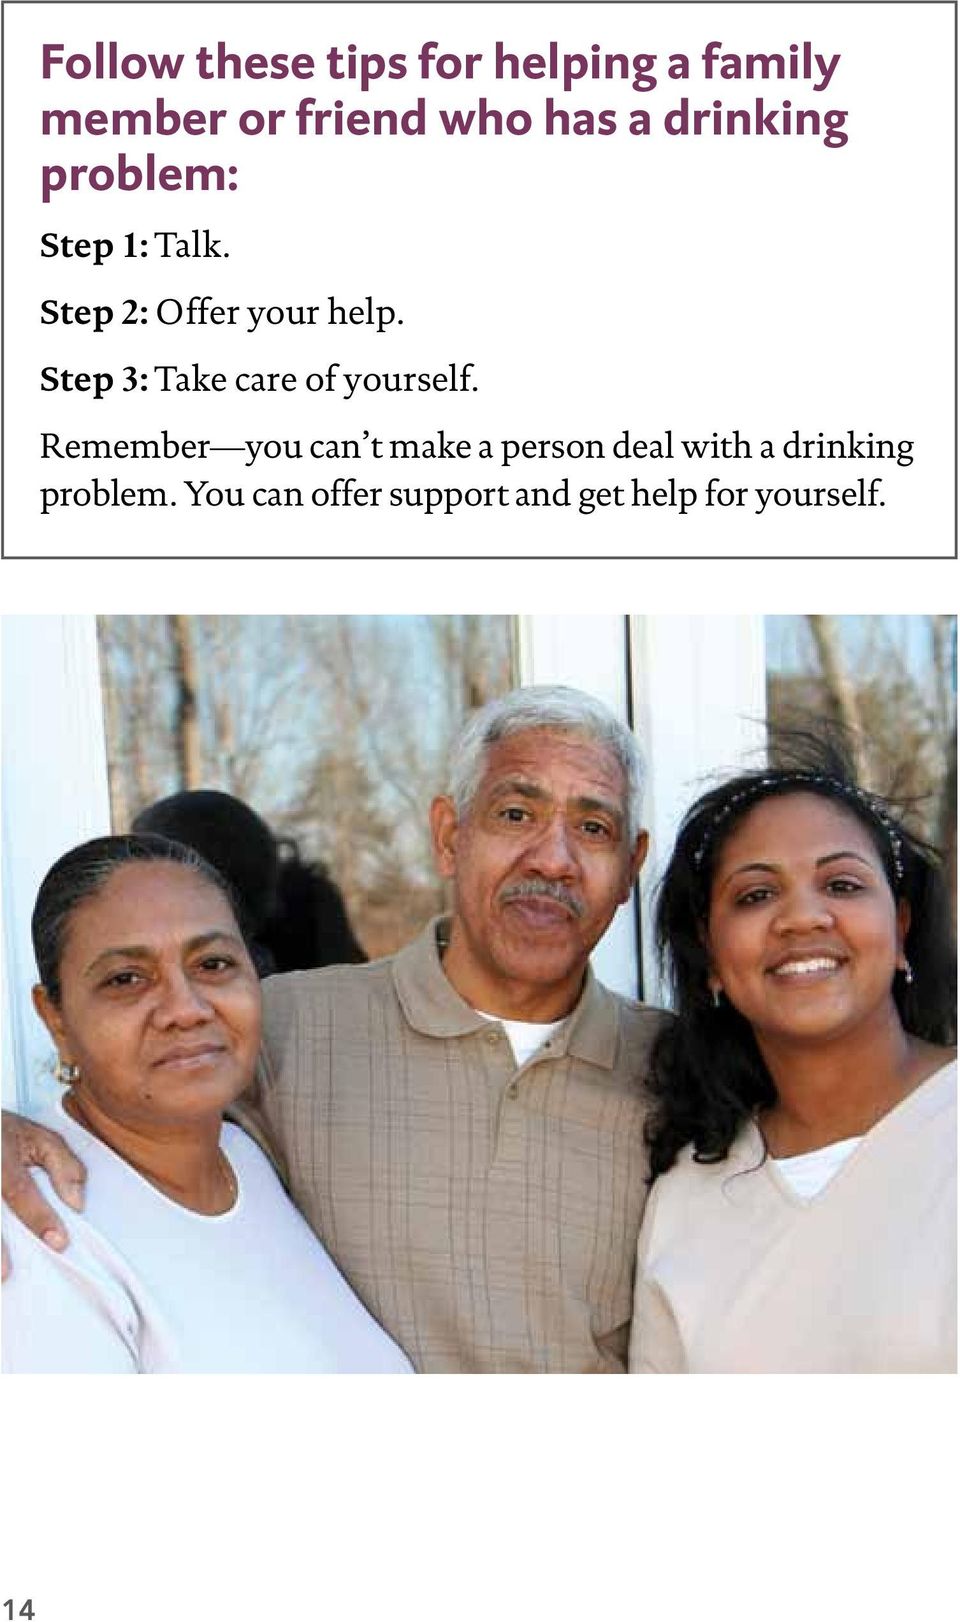 Step 3: Take care of yourself.